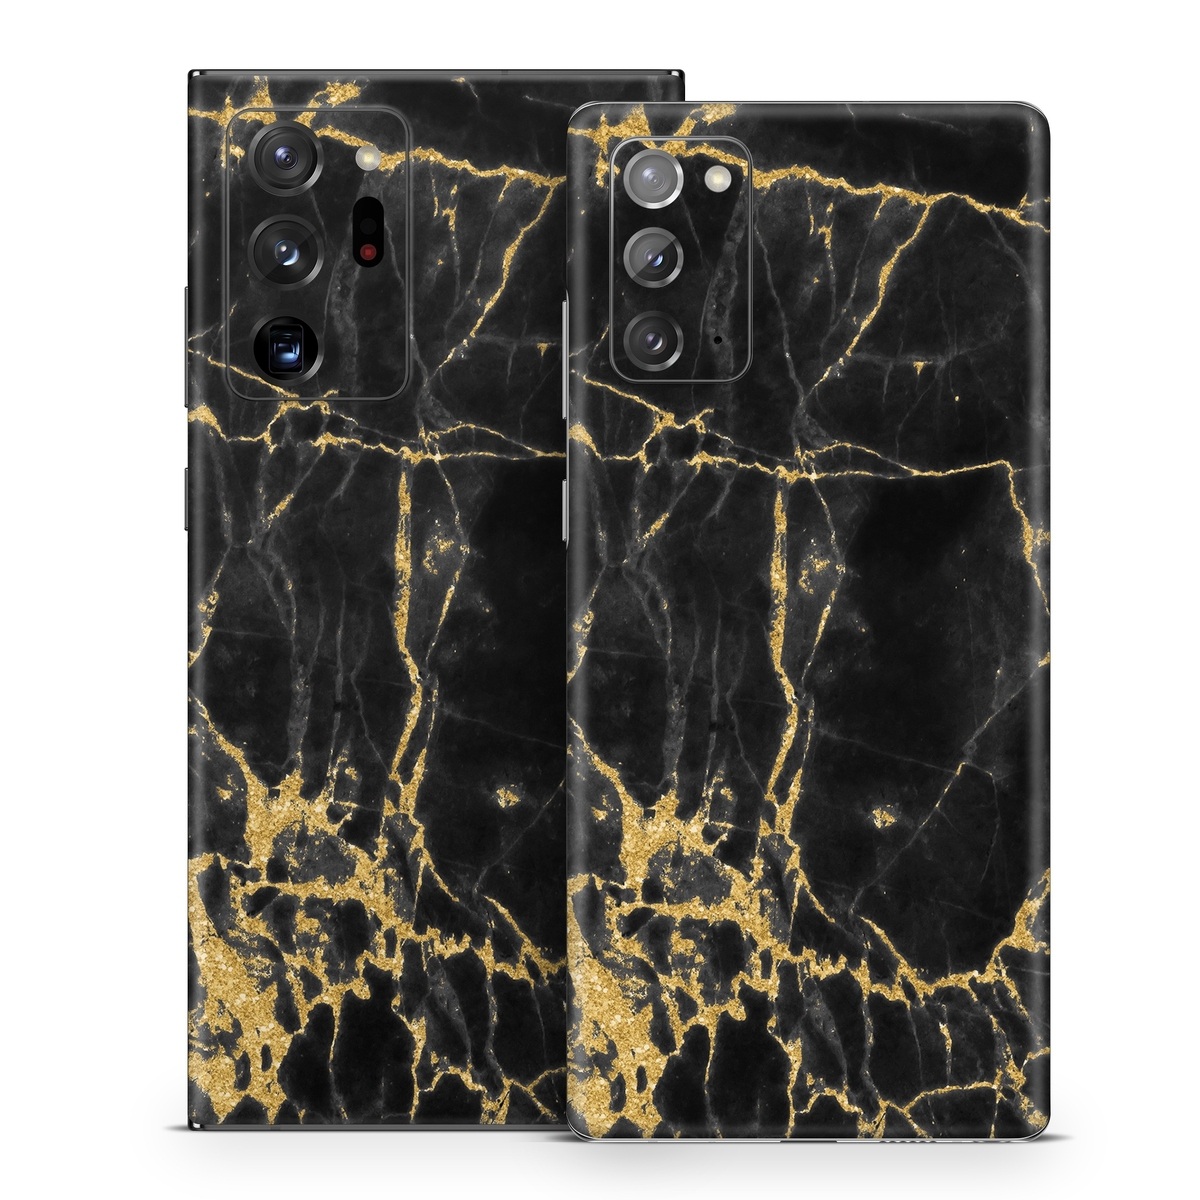 Samsung Galaxy Note 20 Series Skin design of Black, Yellow, Water, Brown, Branch, Leaf, Rock, Tree, Marble, Sky, with black, yellow colors